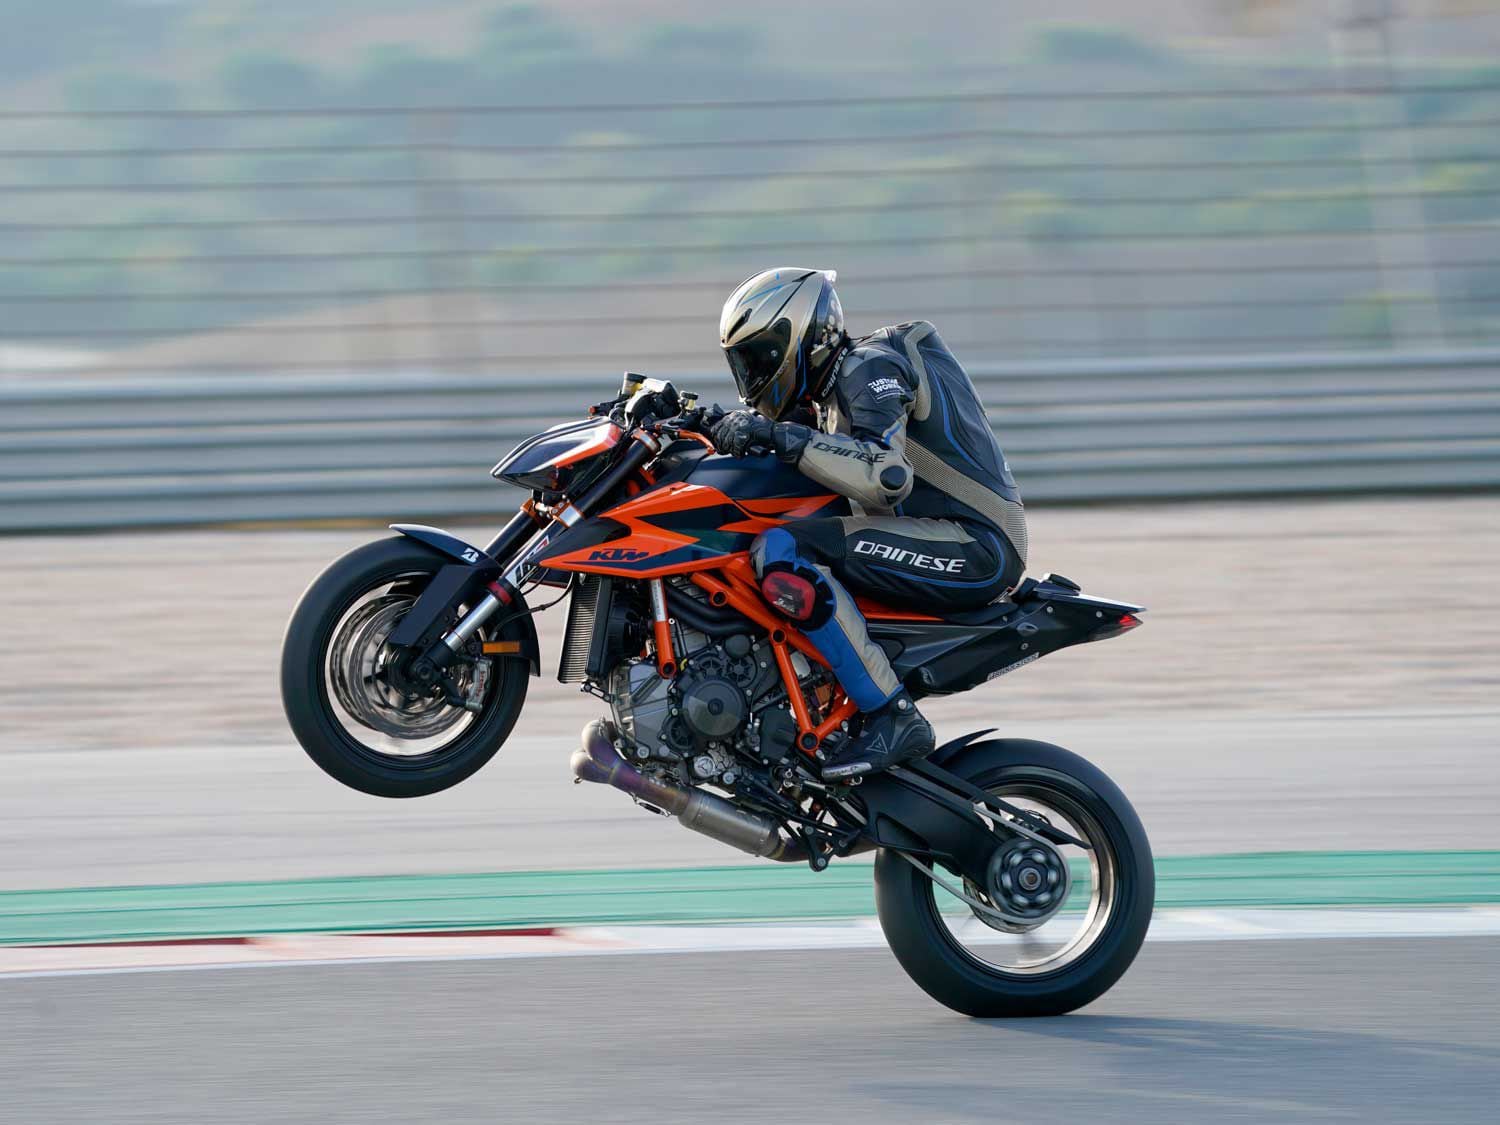 Although dated in terms of its architecture, KTM continues to evolve its 1,301cc V-twin. With the redesigned intake and exhaust the engine gains a fair degree of top-end power.